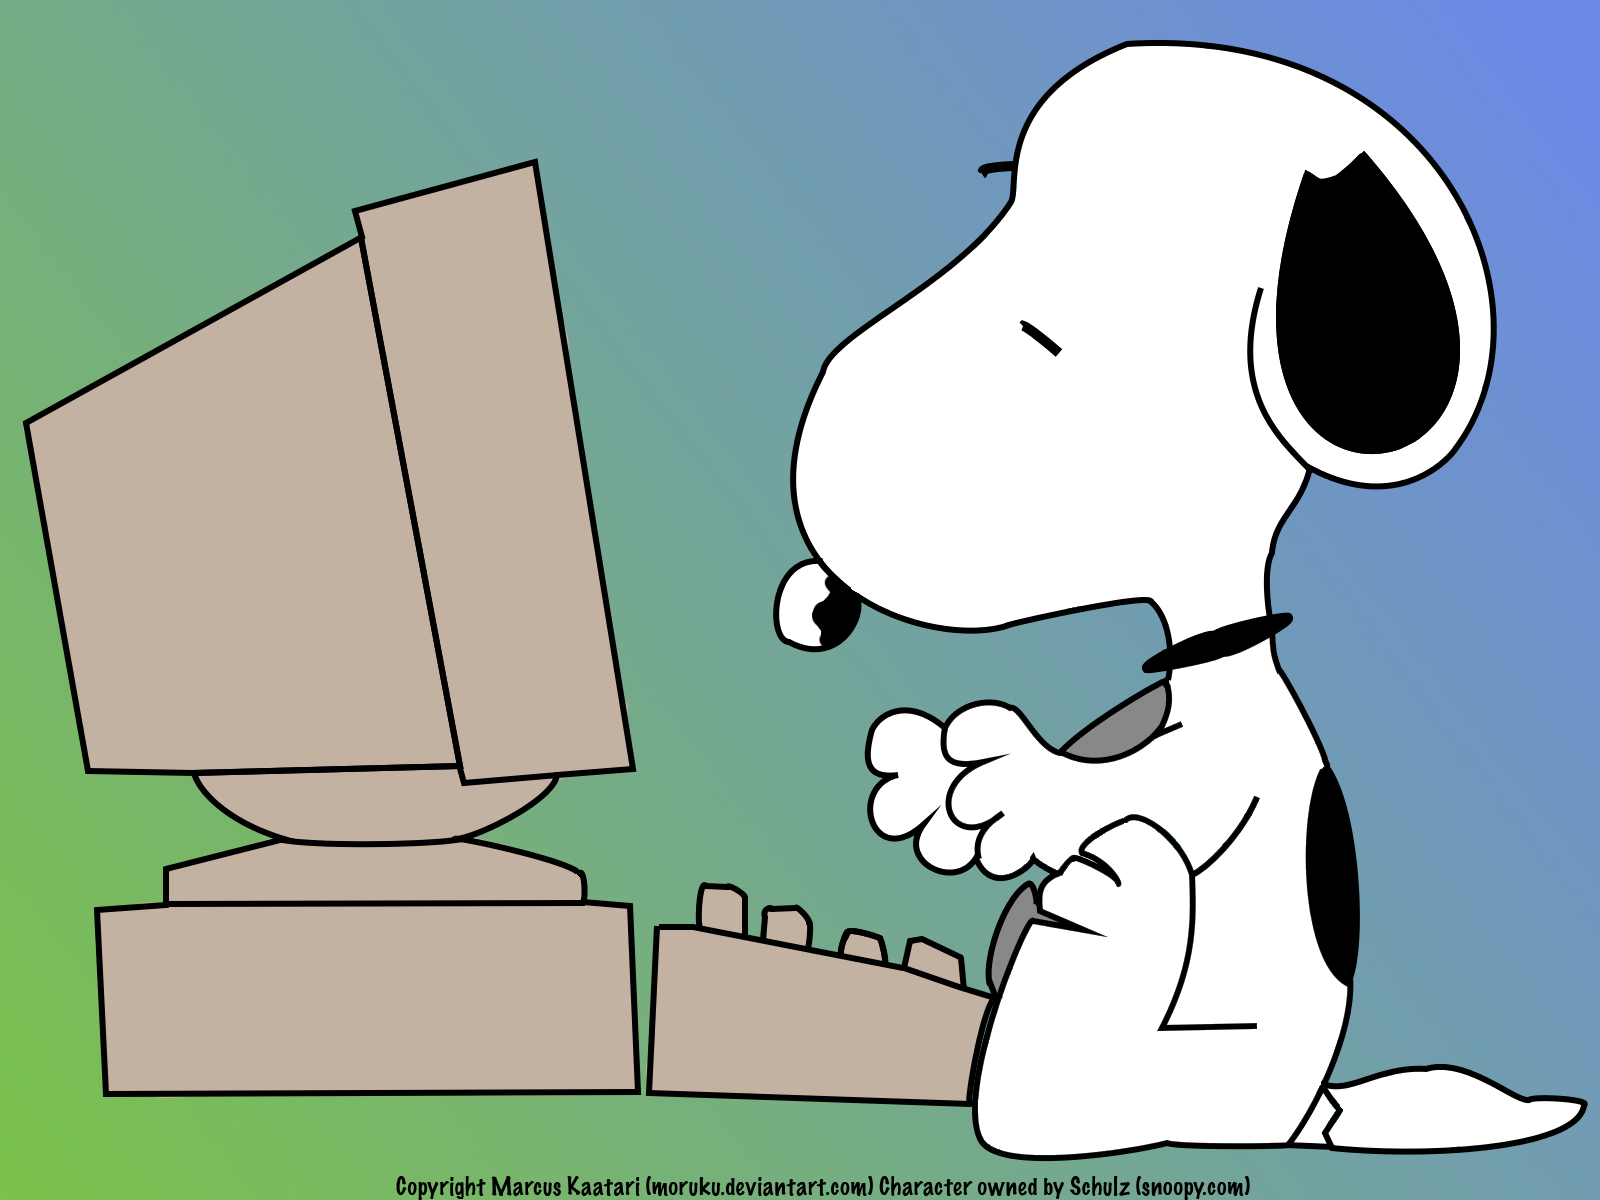 Free Download That I Love But Snoopy Is My Favorite Because Hes A Writer 1600x10 For Your Desktop Mobile Tablet Explore 47 Snoopy Wallpaper For My Desktop Snoopy Wallpaper Screensavers